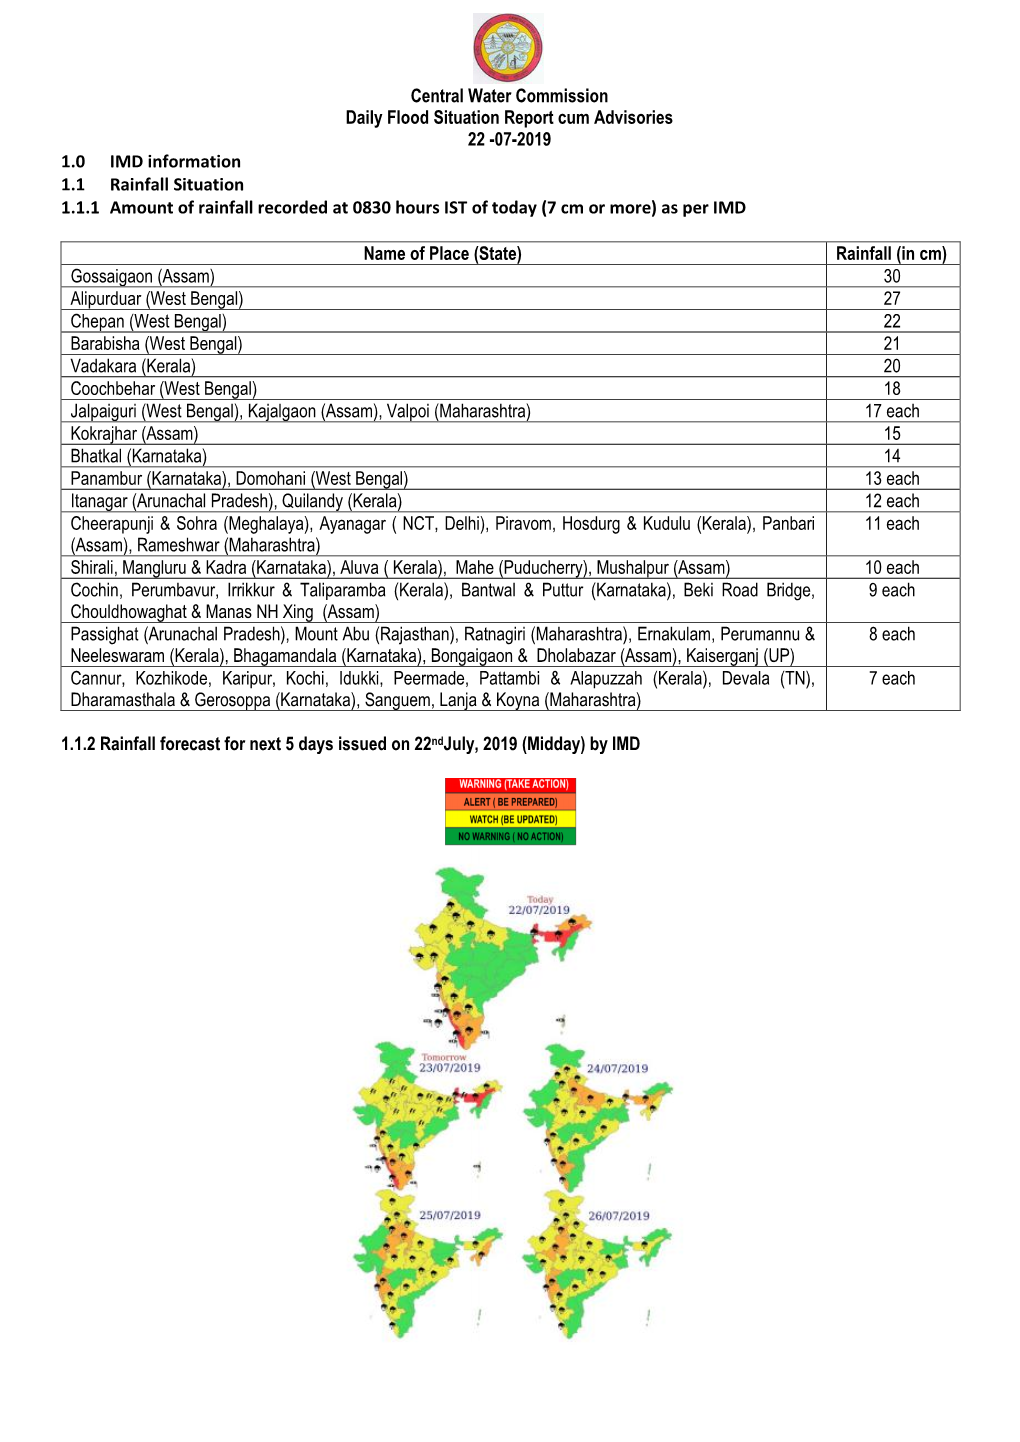 07-2019 1.0 IMD Information 1.1 Rainfall Situation 1.1.1 Amount of Rainfall Recorded at 0830 Hours IST of Today (7 Cm Or More) As Per IMD